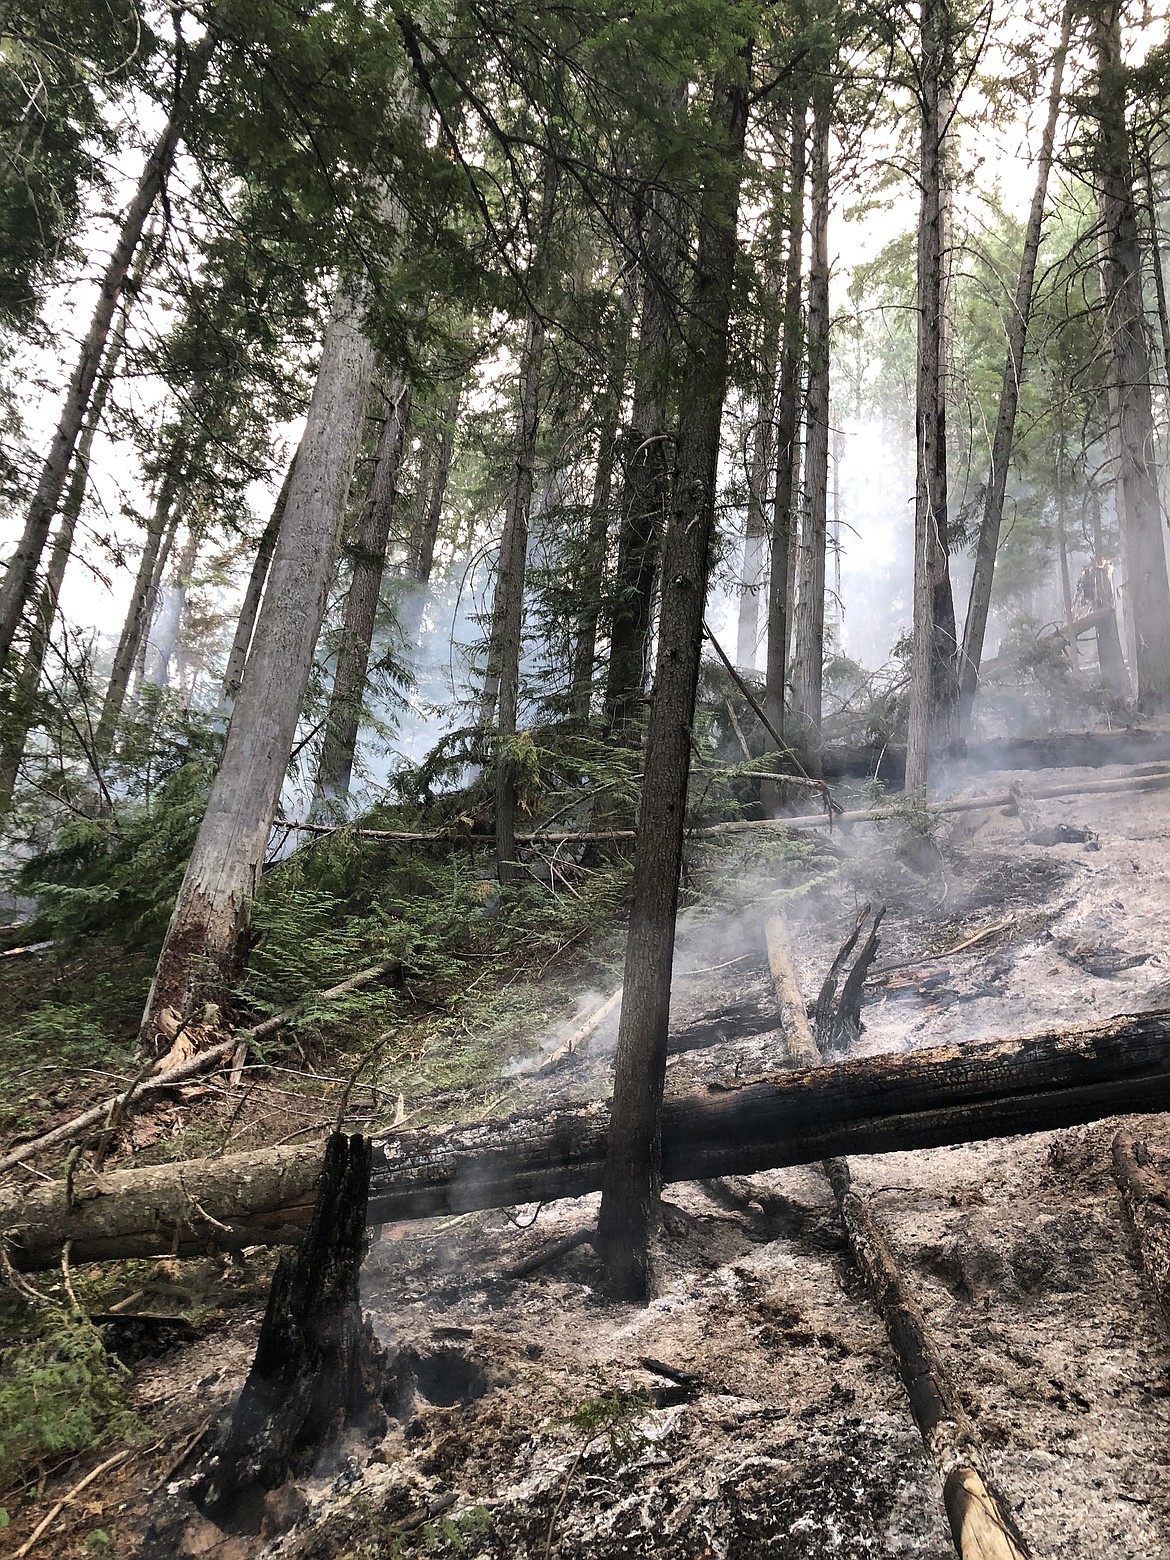 The West Branch Fire, located about 9 miles due west of Coolin and about a half-mile west of the Idaho-Washington state line, has grown to about 60 acres.